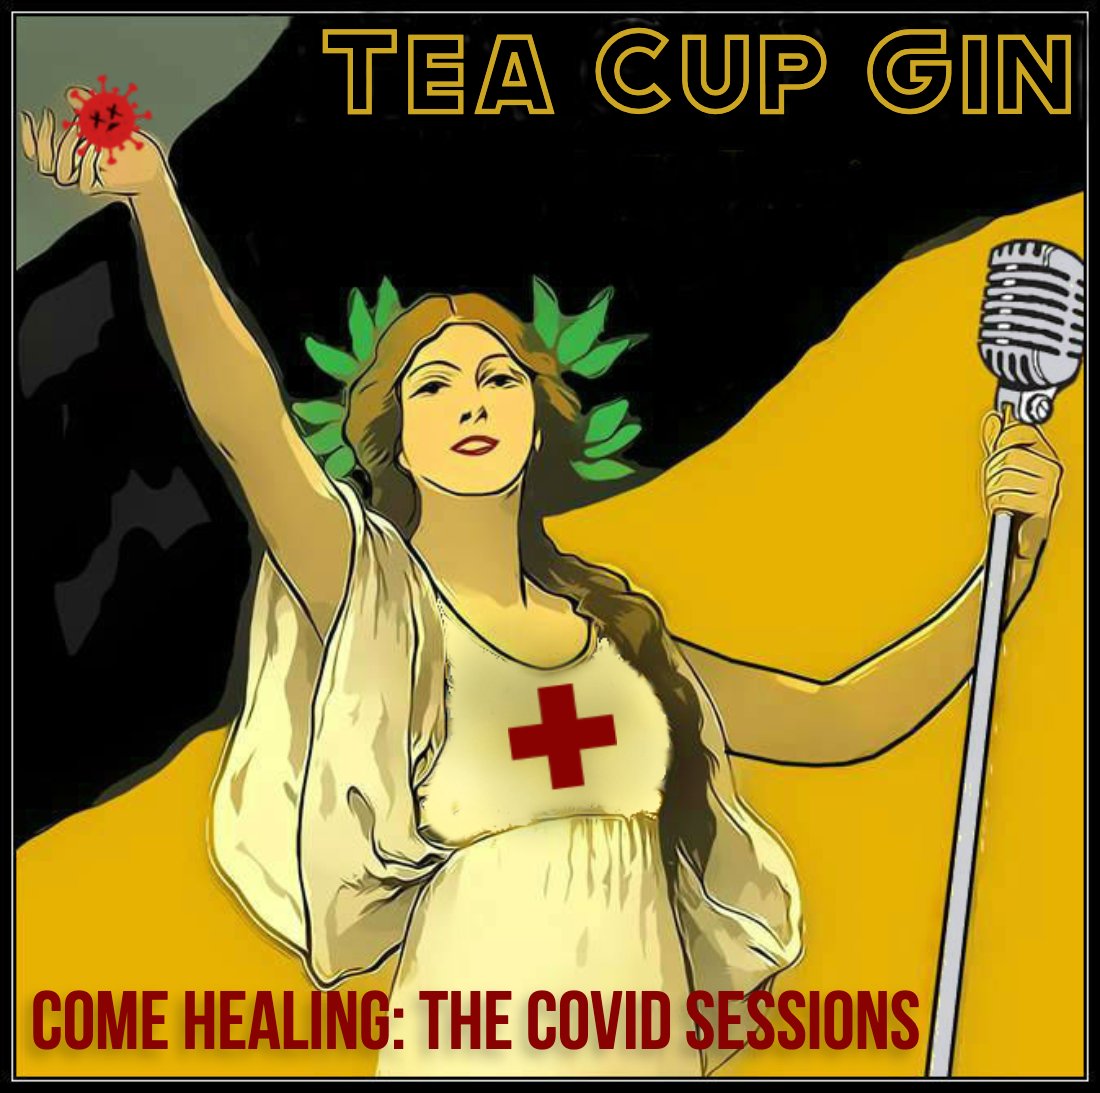 &quot;COME HEALING: The Covid Sessions&quot; by Tea Cup Gin